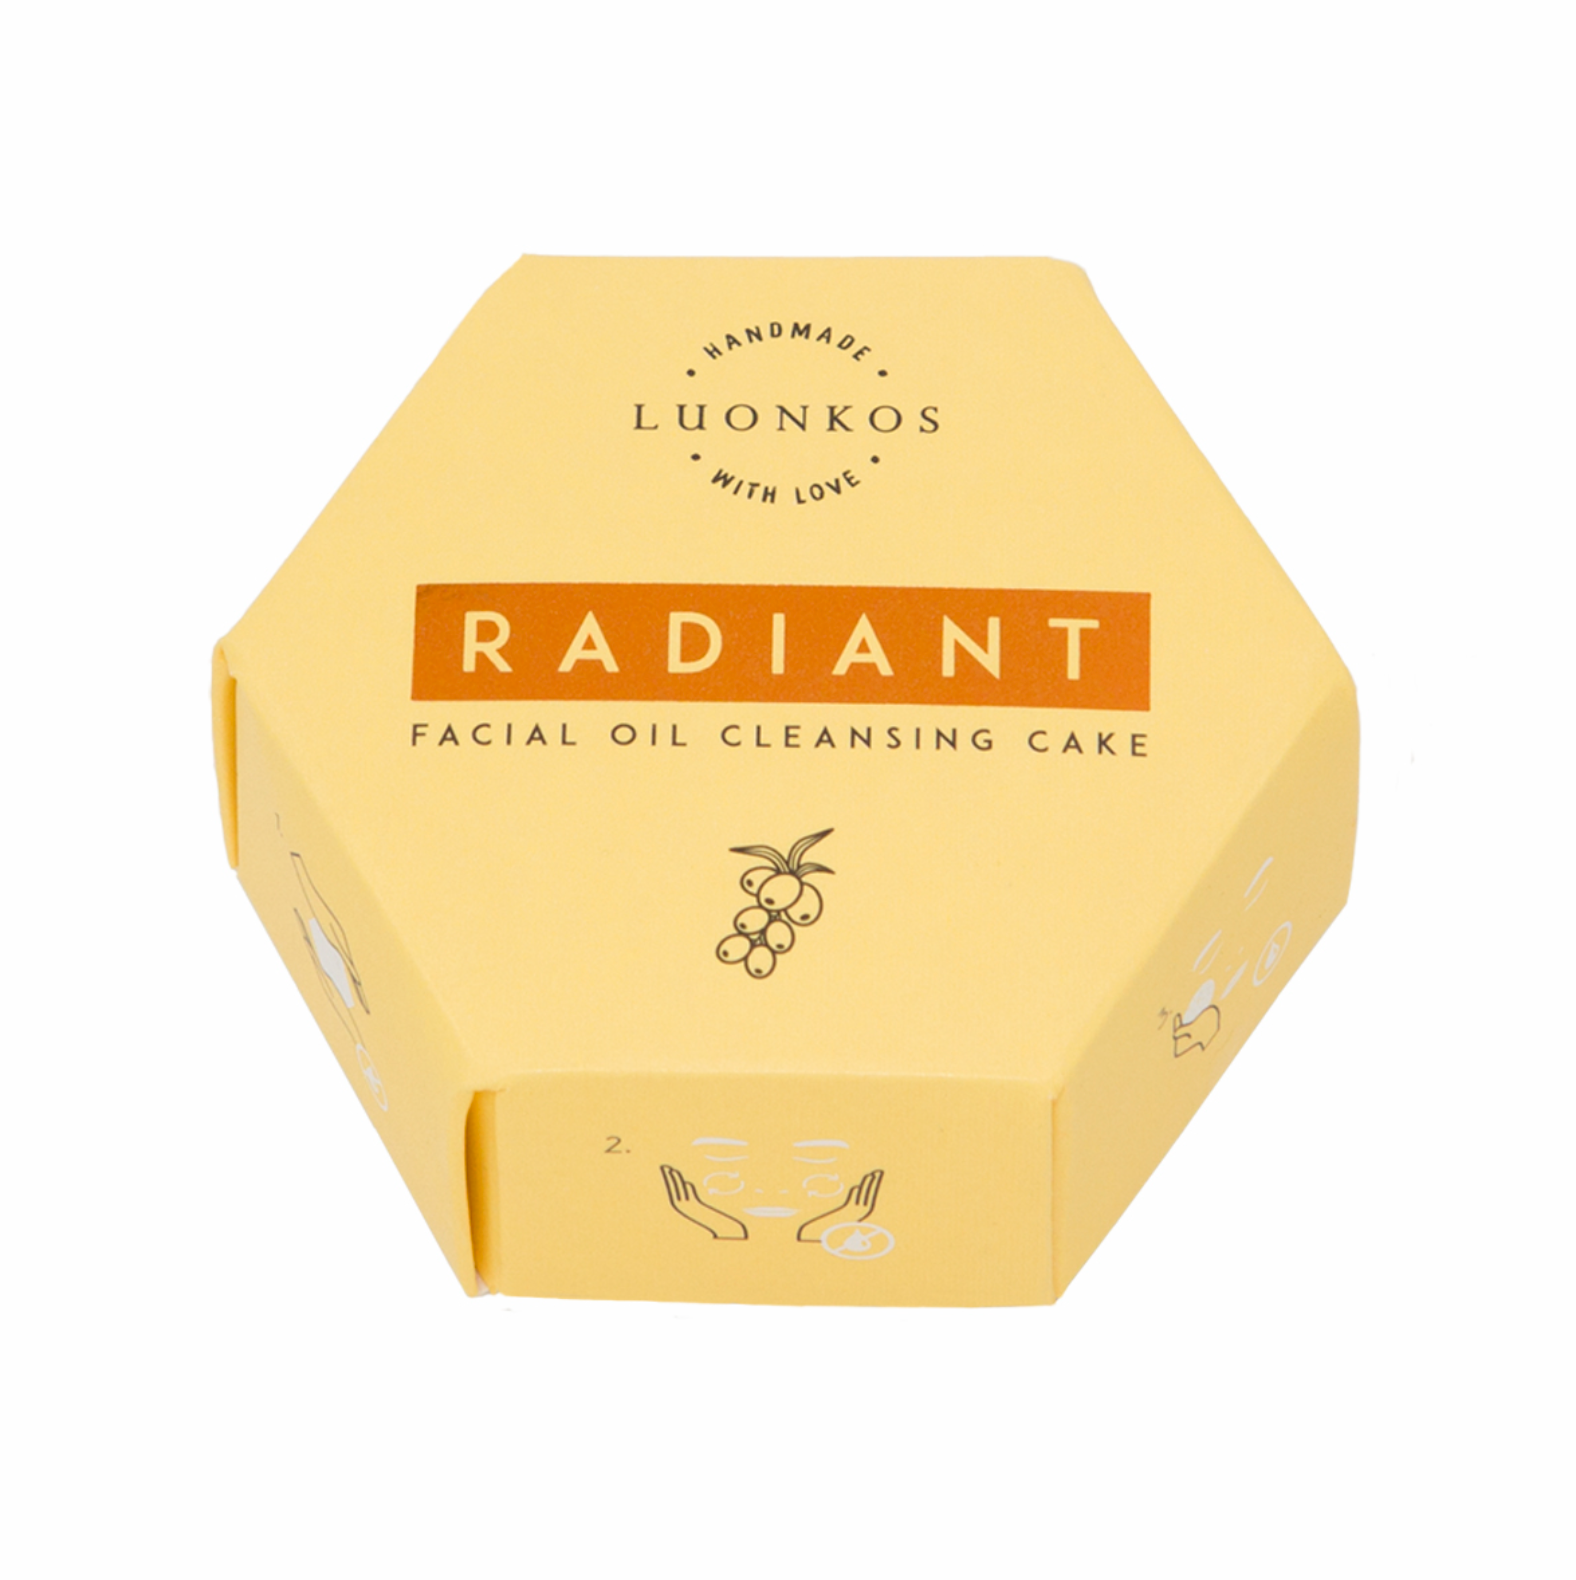 Radiant Facial Oil Cleansing Cake